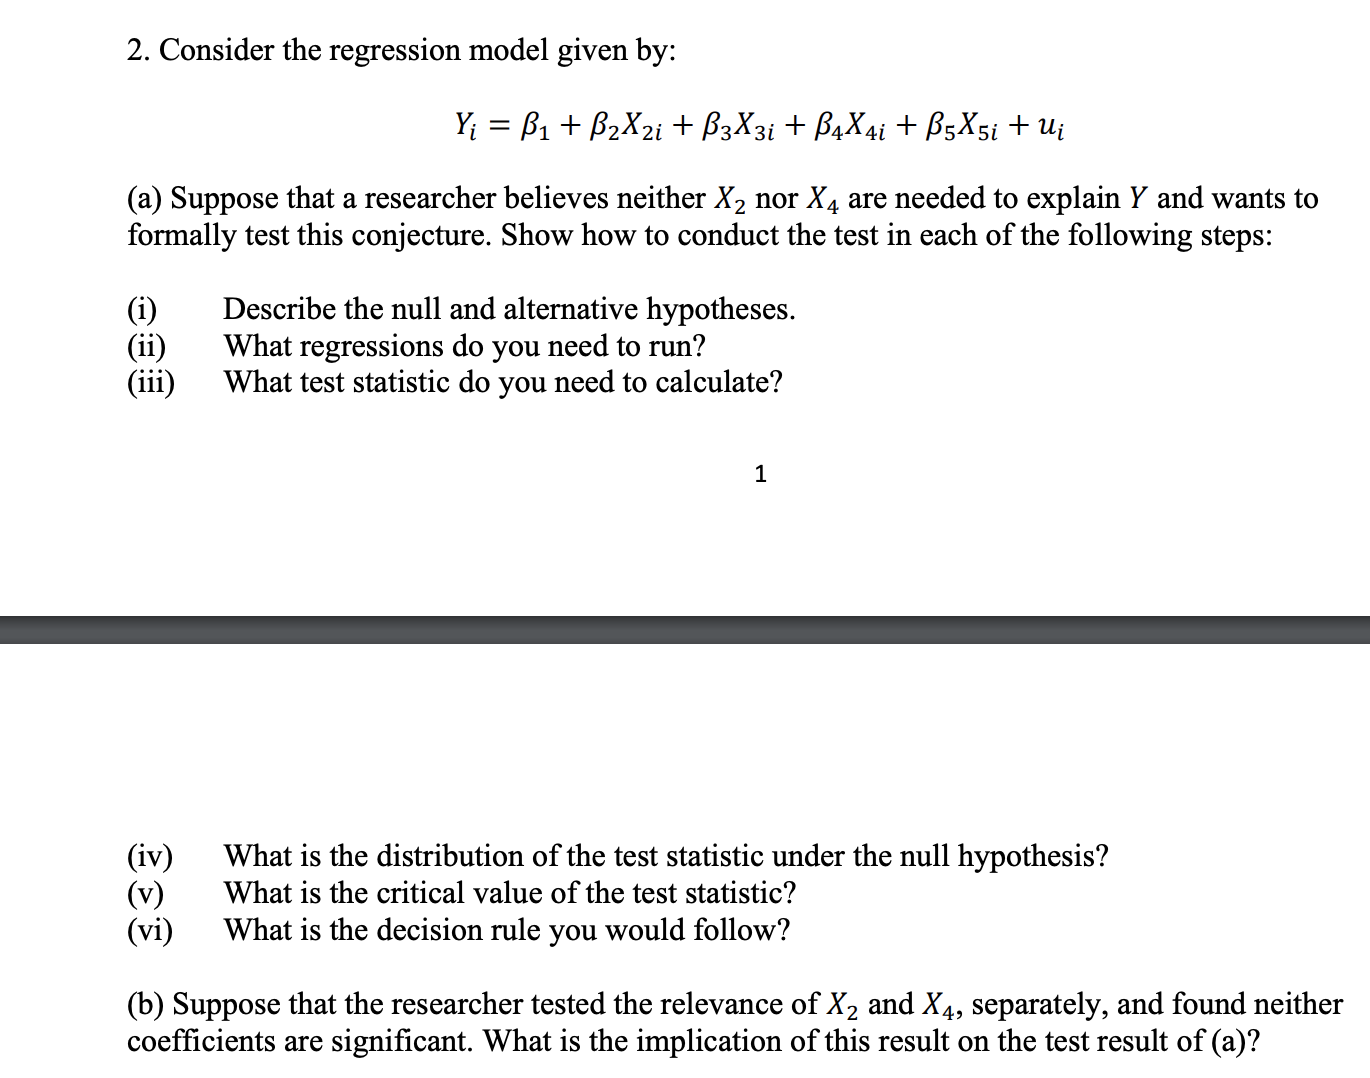 2. Consider the regression model given by:
B1B2X2i+B3X3i +B4X4i+ B5X5i + Ui
Y
(a) Suppose that a researcher believes neither X2 nor X4 are needed to explain Y and wants to
formally test this conjecture. Show how to conduct the test in each of the following steps:
Describe the null and alternative hypotheses.
What regressions do you need to run?
What test statistic do you need to calculate?
(i)
(ii)
(iii)
1
(iv)
(v)
(vi)
What is the distribution of the test statistic under the null hypothesis?
What is the critical value of the test statistic?
What is the decision rule you would follow?
(b) Suppose that the researcher tested the relevance of X2 and X4, separately, and found neither
coefficients are significant. What is the implication of this result on the test result of (a)?
